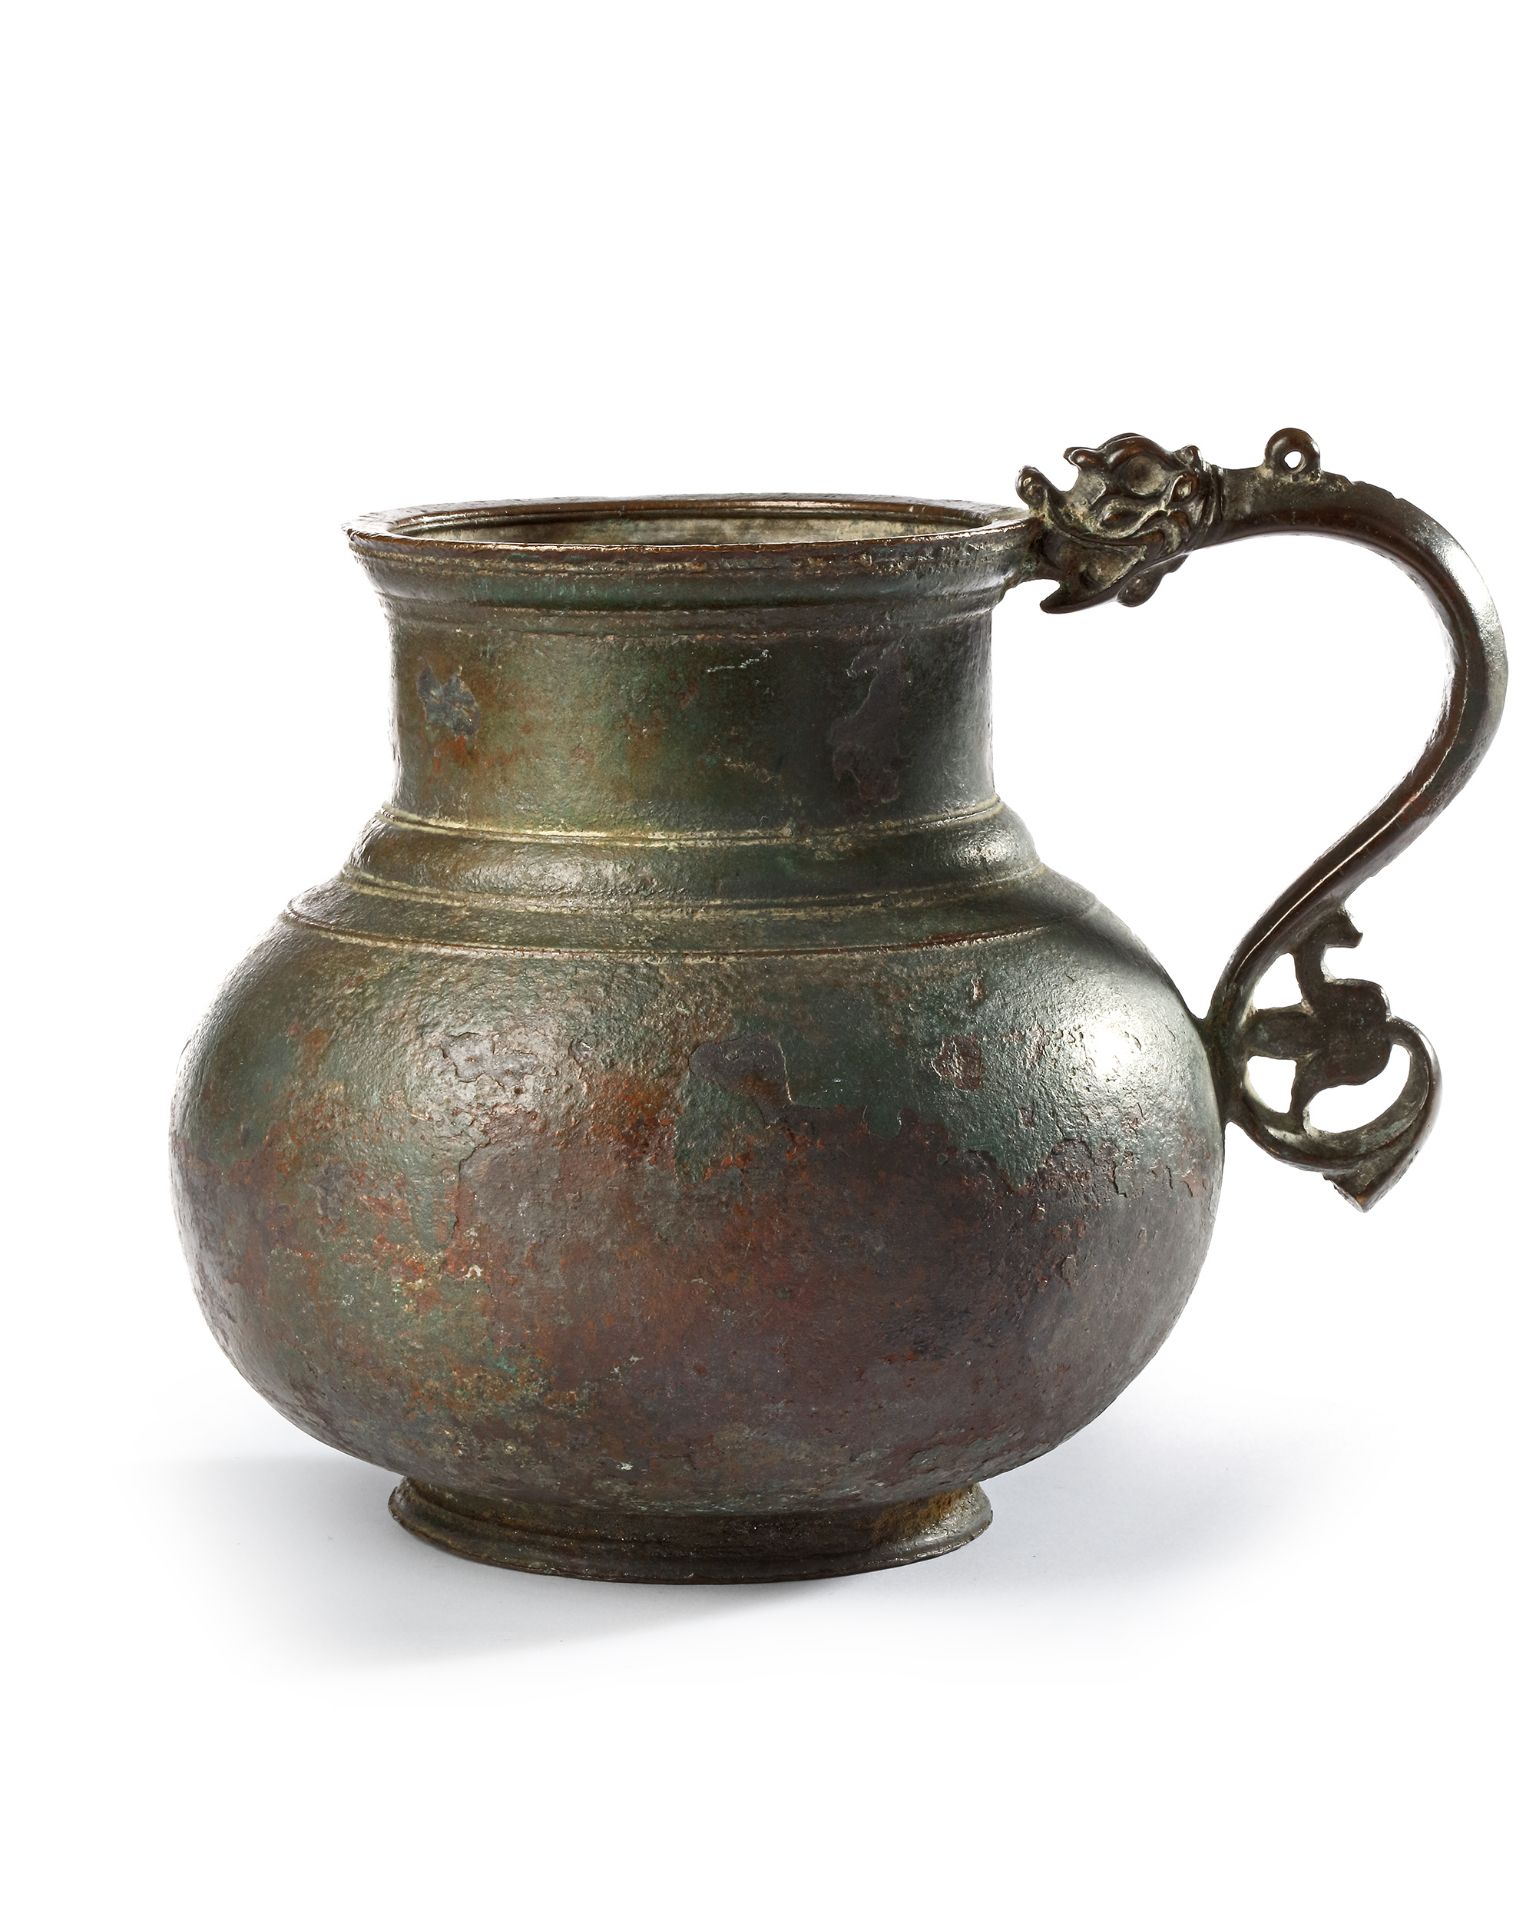 A TIMURID DRAGON-HANDLED JUG, CENTRAL ASIA, LATE 14TH- EARLY 15TH CENTURY - Image 2 of 10